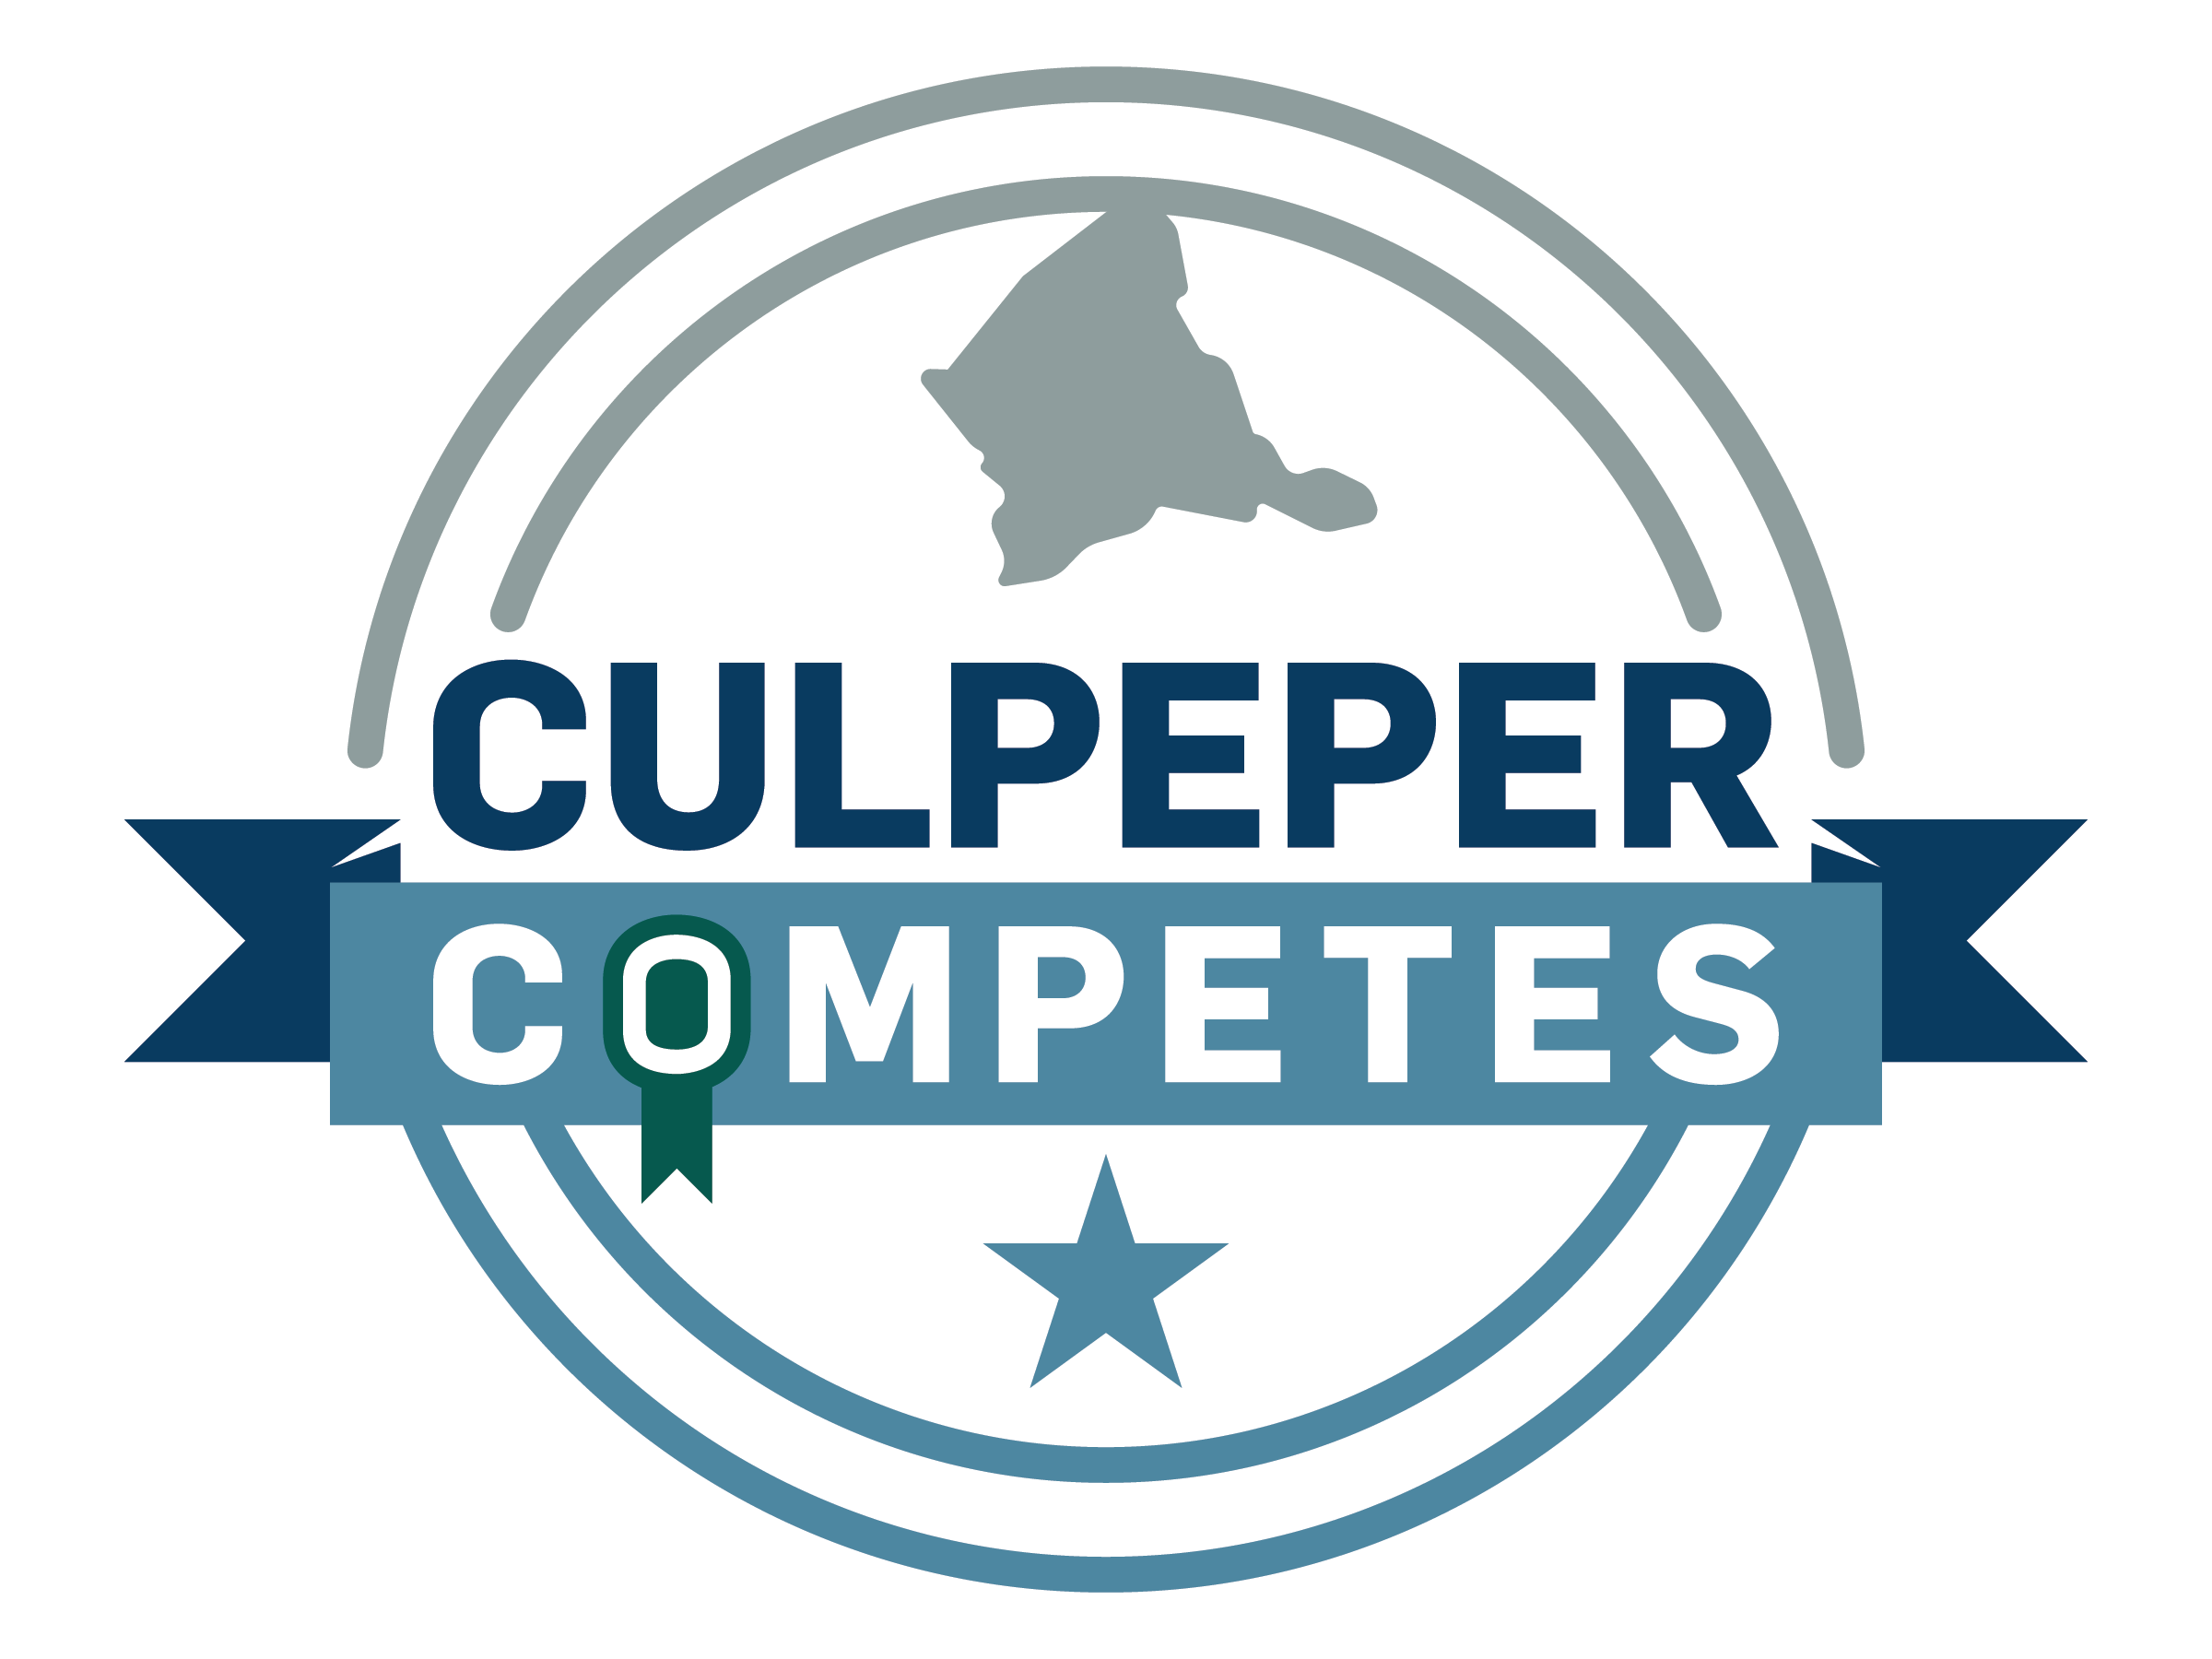 Town of Culpeper Launches Culpeper Competes in Partnership with Central Virginia Small Business Development Center Image